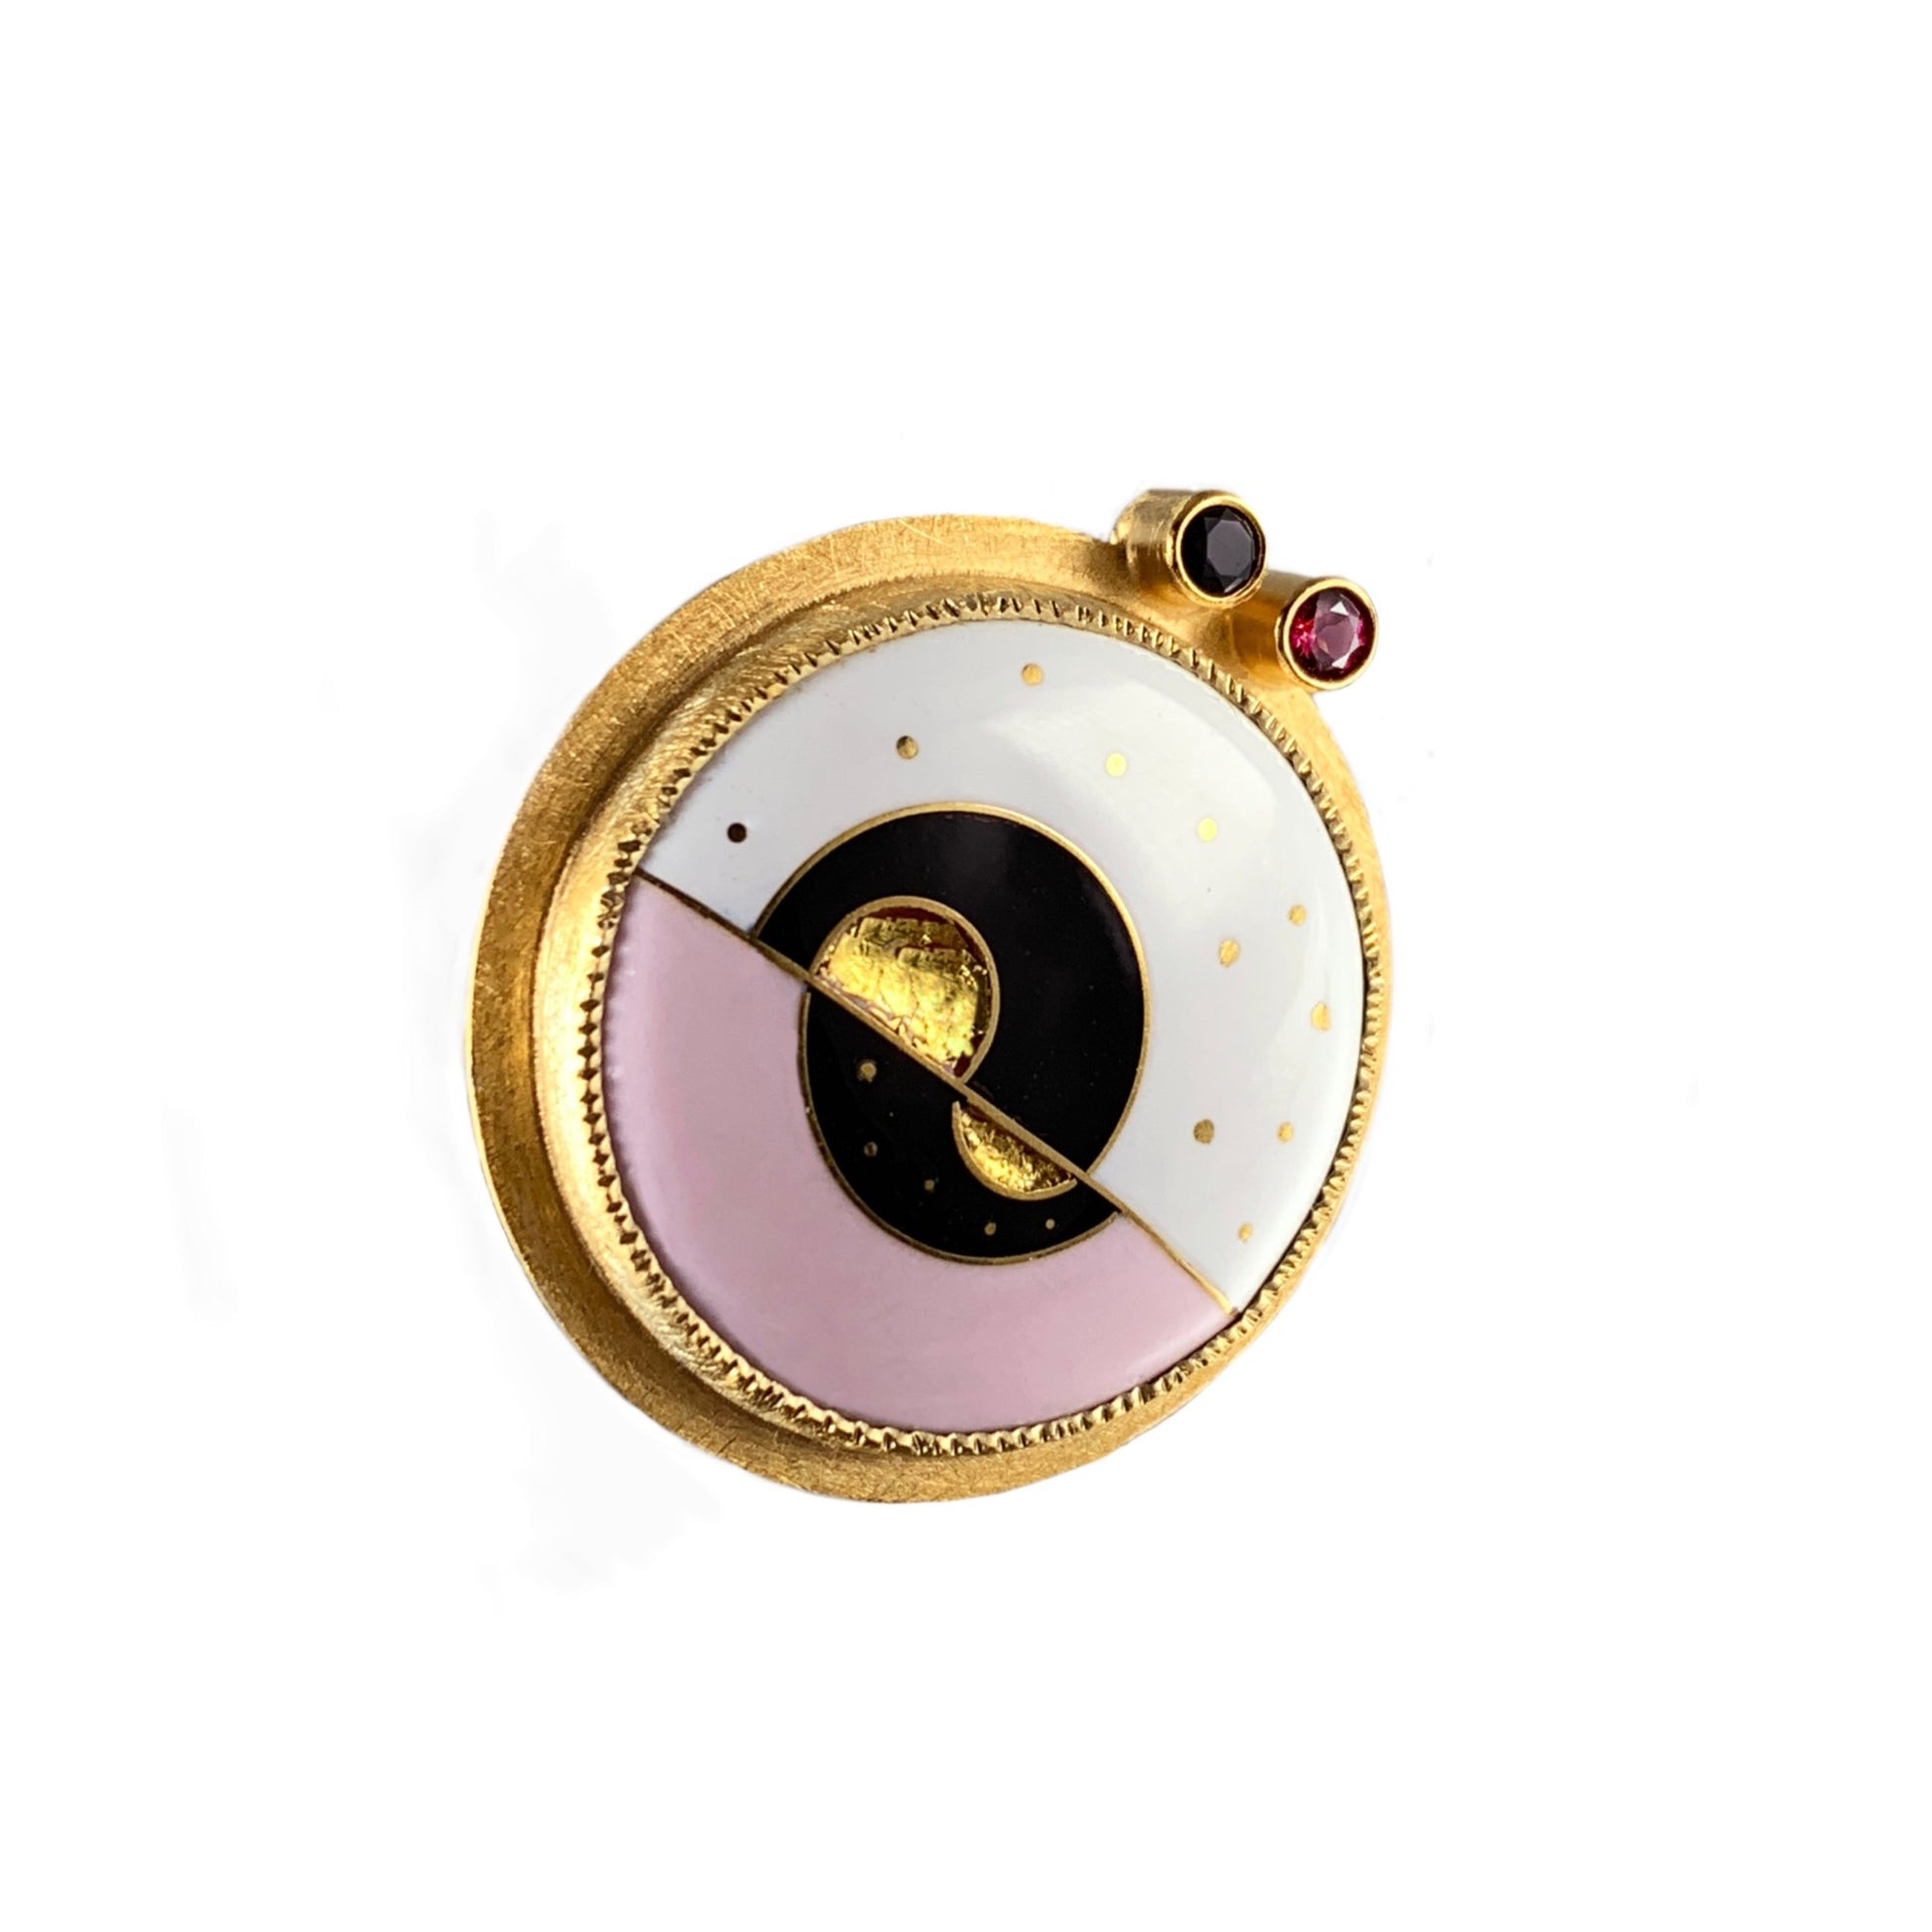 24k gold cloisonné enamel brooch pin with gemstone accents